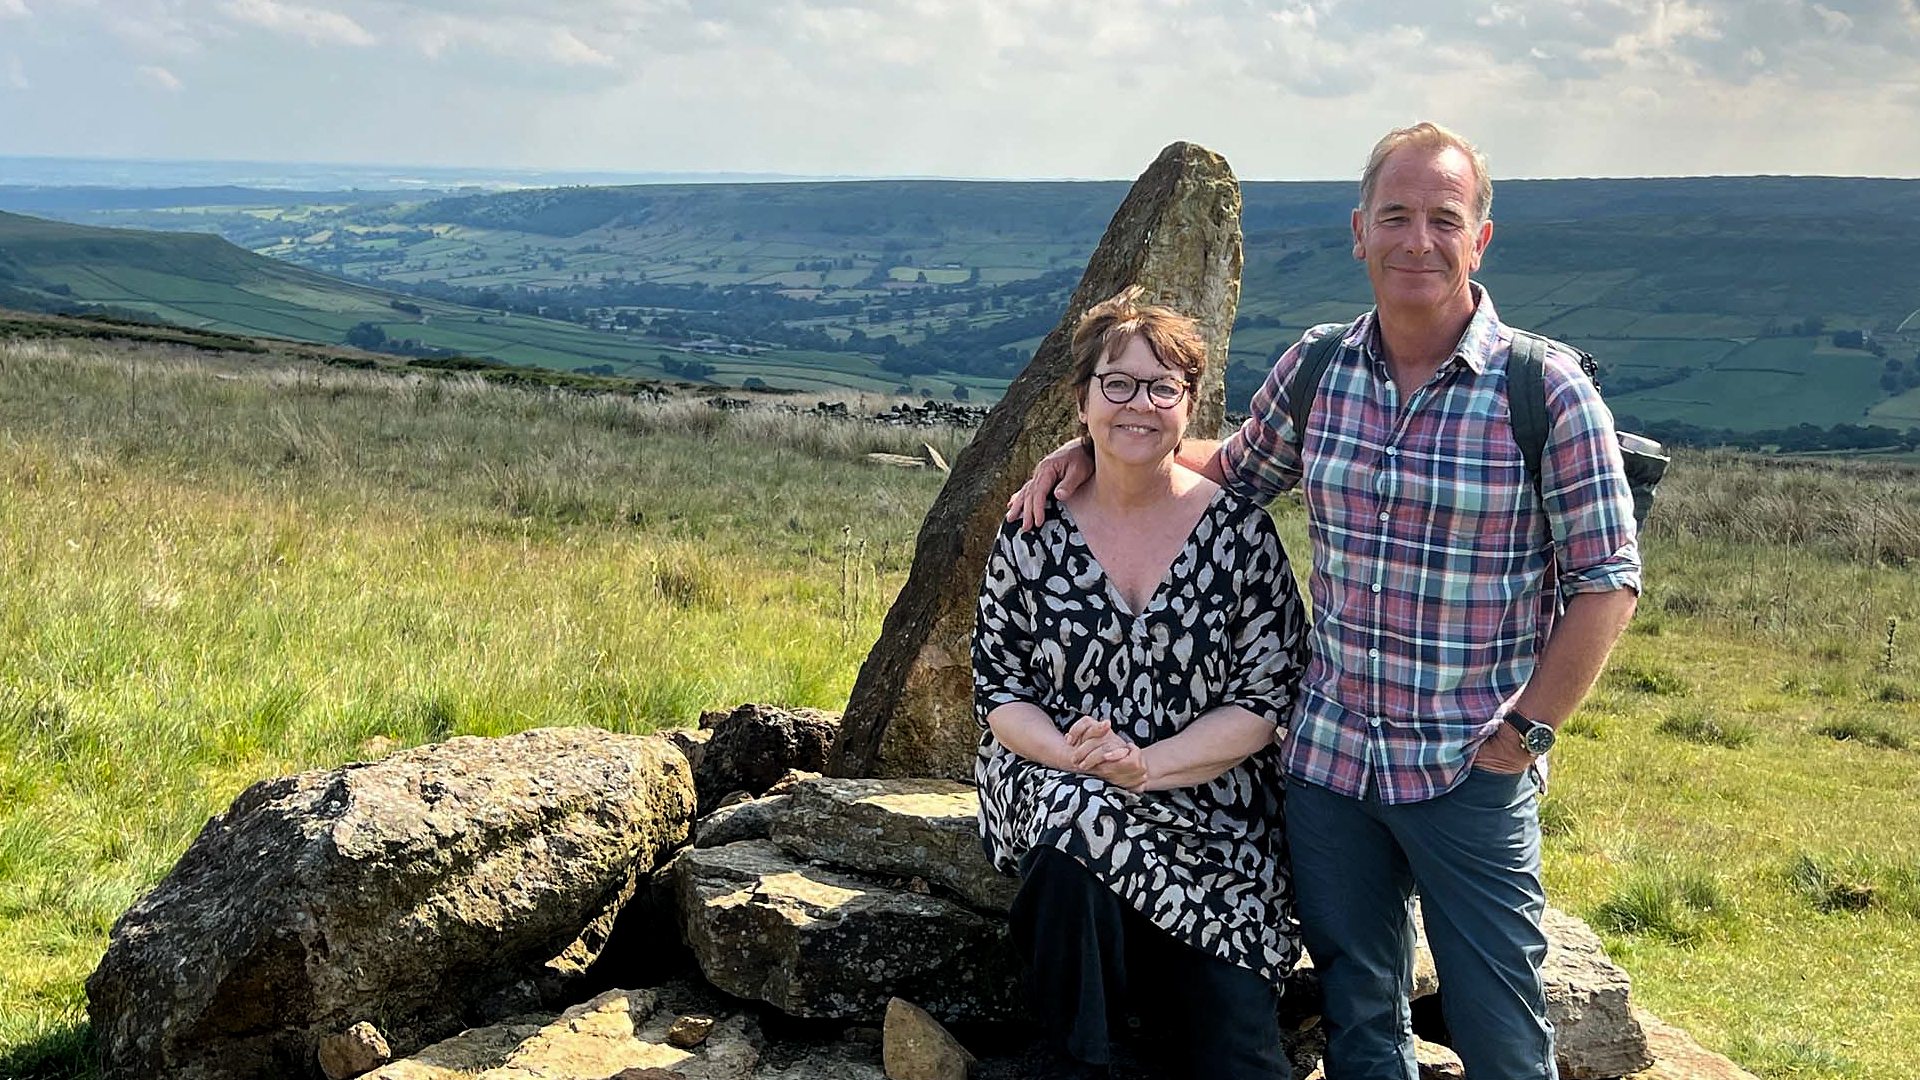 Robson Green's Weekend Escapes with Tessa Peake-Jones on the North York Moors